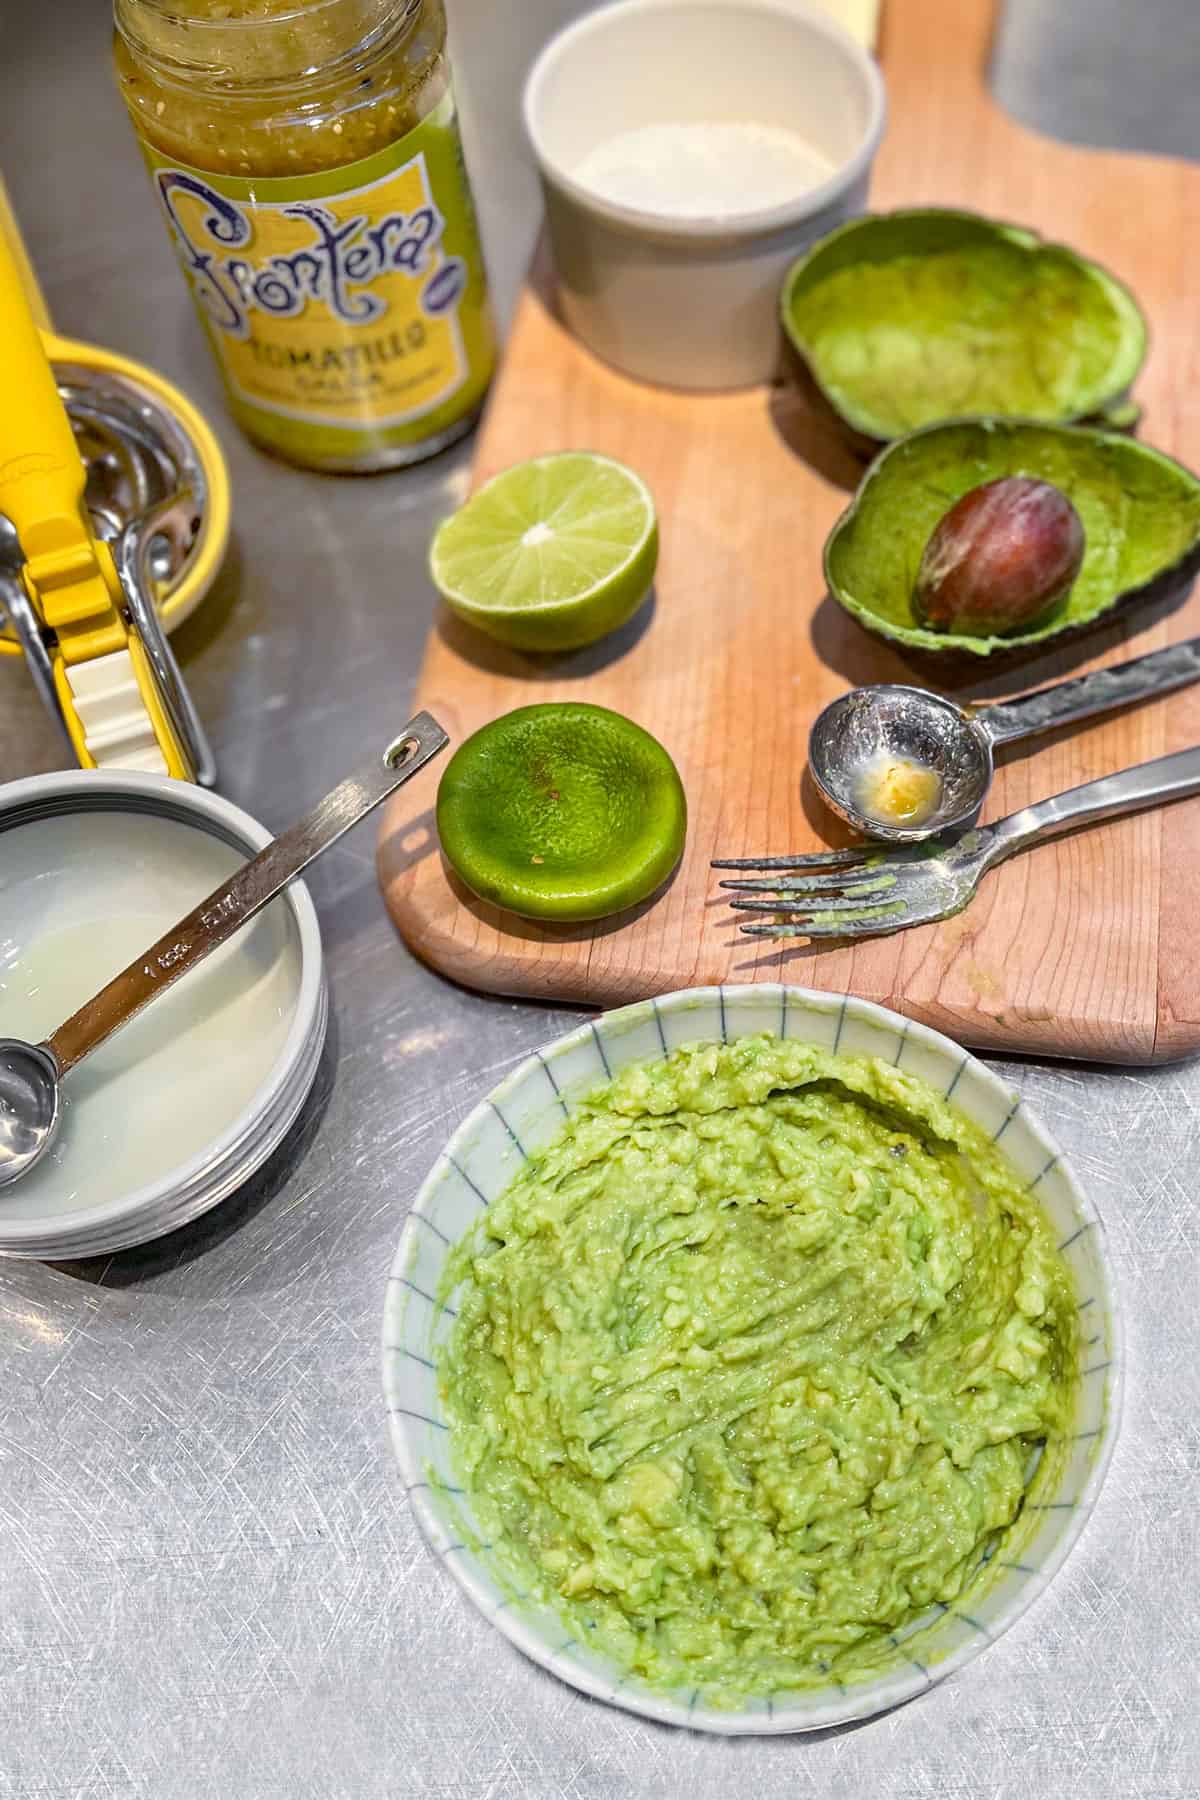 Overhead shot of a small bowl of avocado lime salsa surrounded the empty avocado skin and the pit, the squeezed lime half, and an open jar of salsa verde